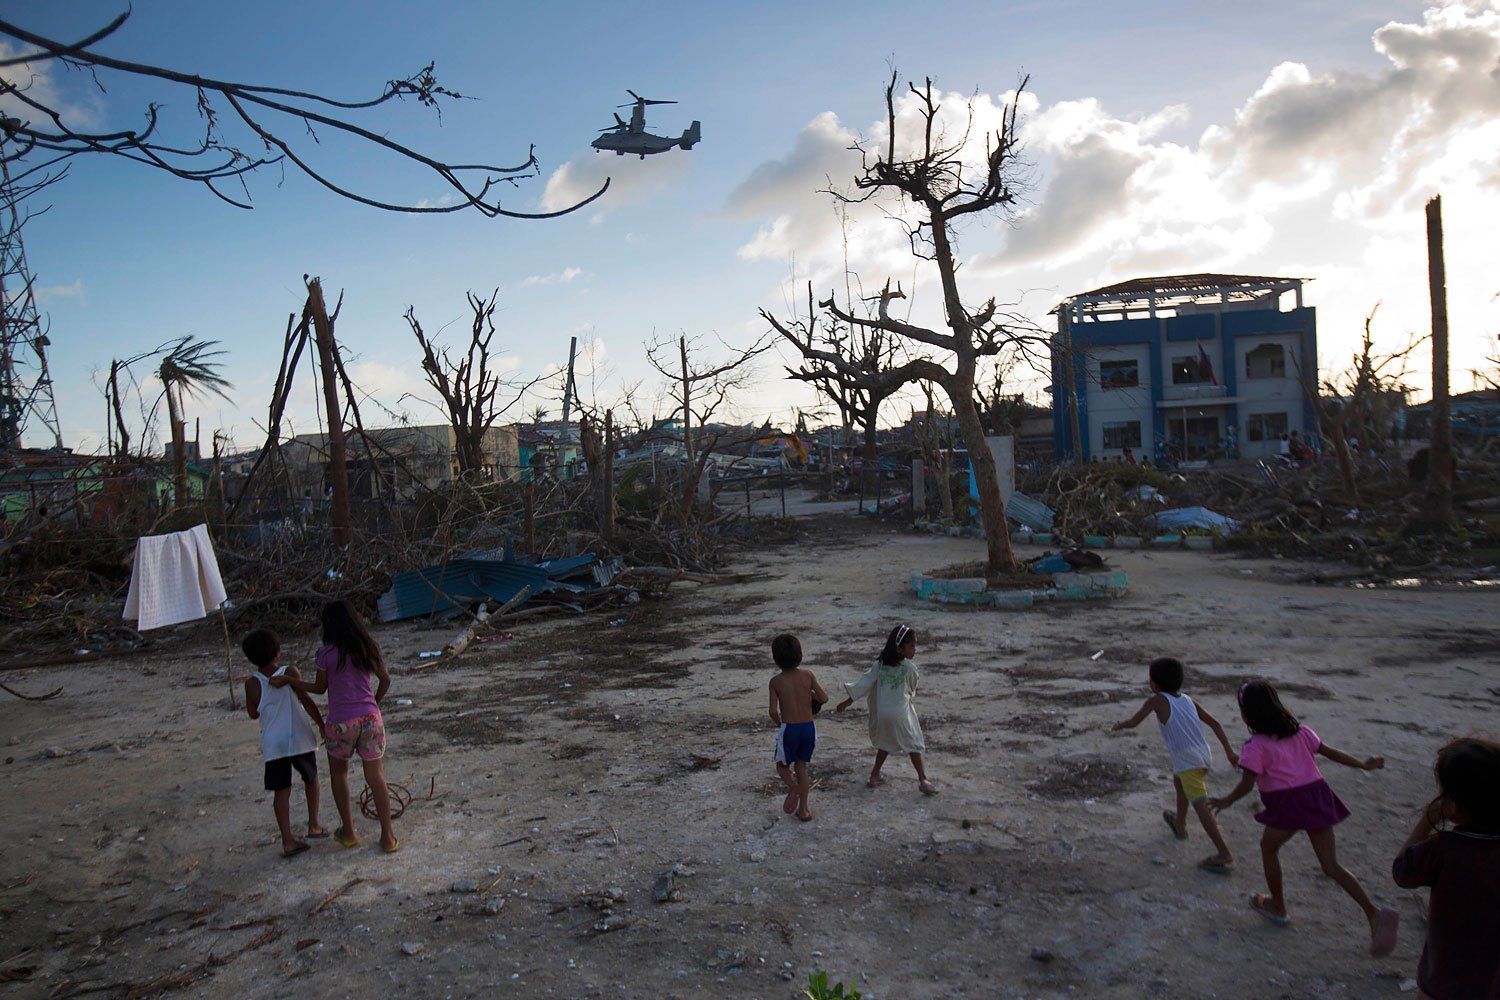 Children run towards a U.S. military aircraft as it arrives to distribute aid to Typhoon Haiyan survivors in the destroyed town of Guiuan, Philippines on November 14, 2013.